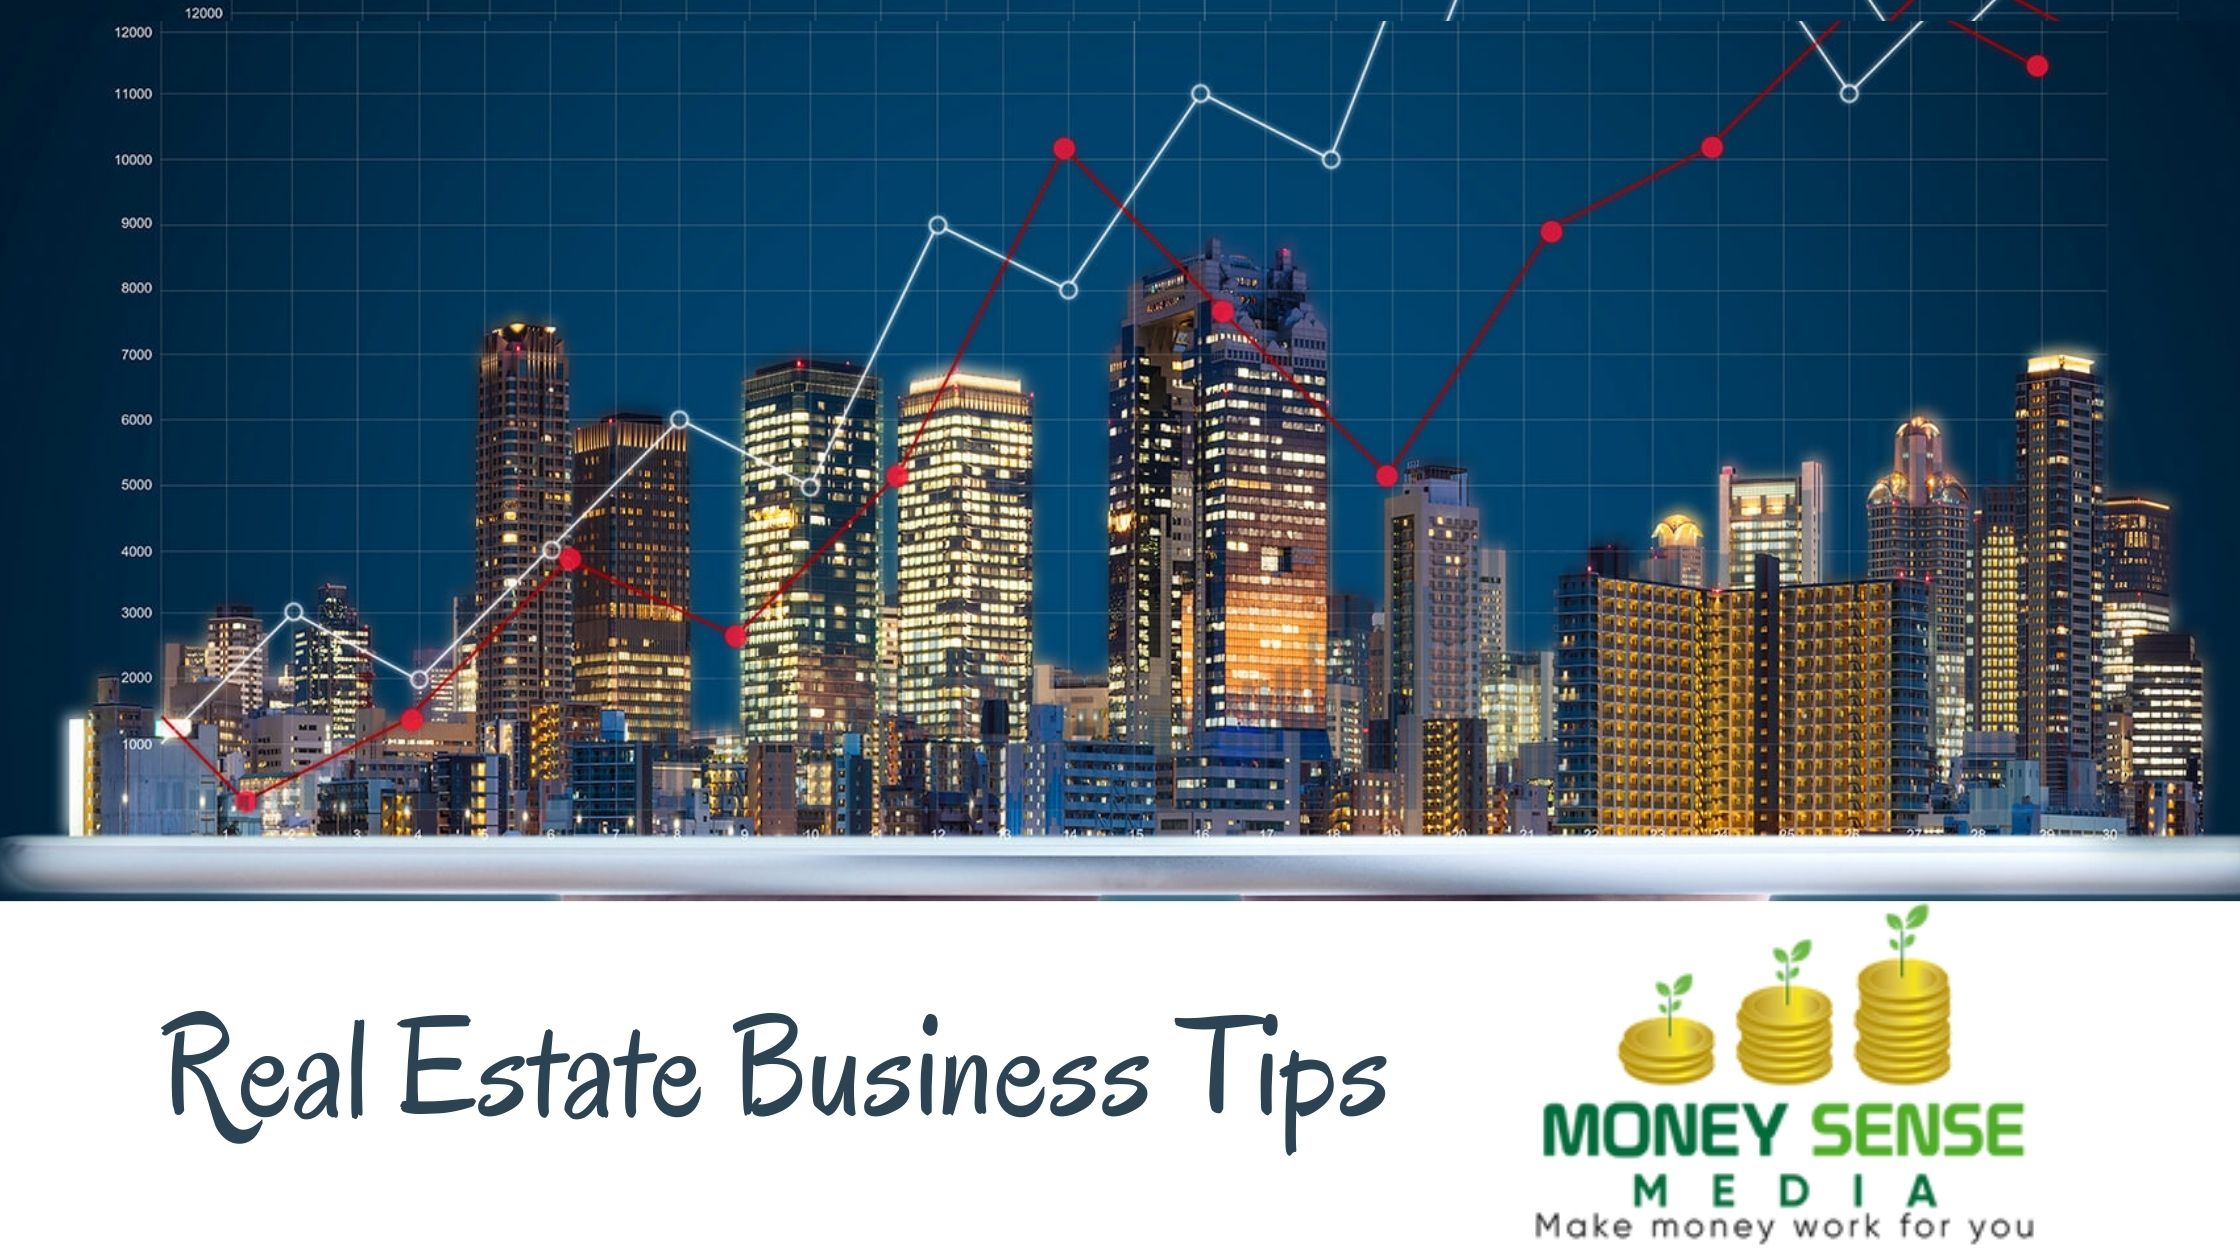 Real Estate Business Tips